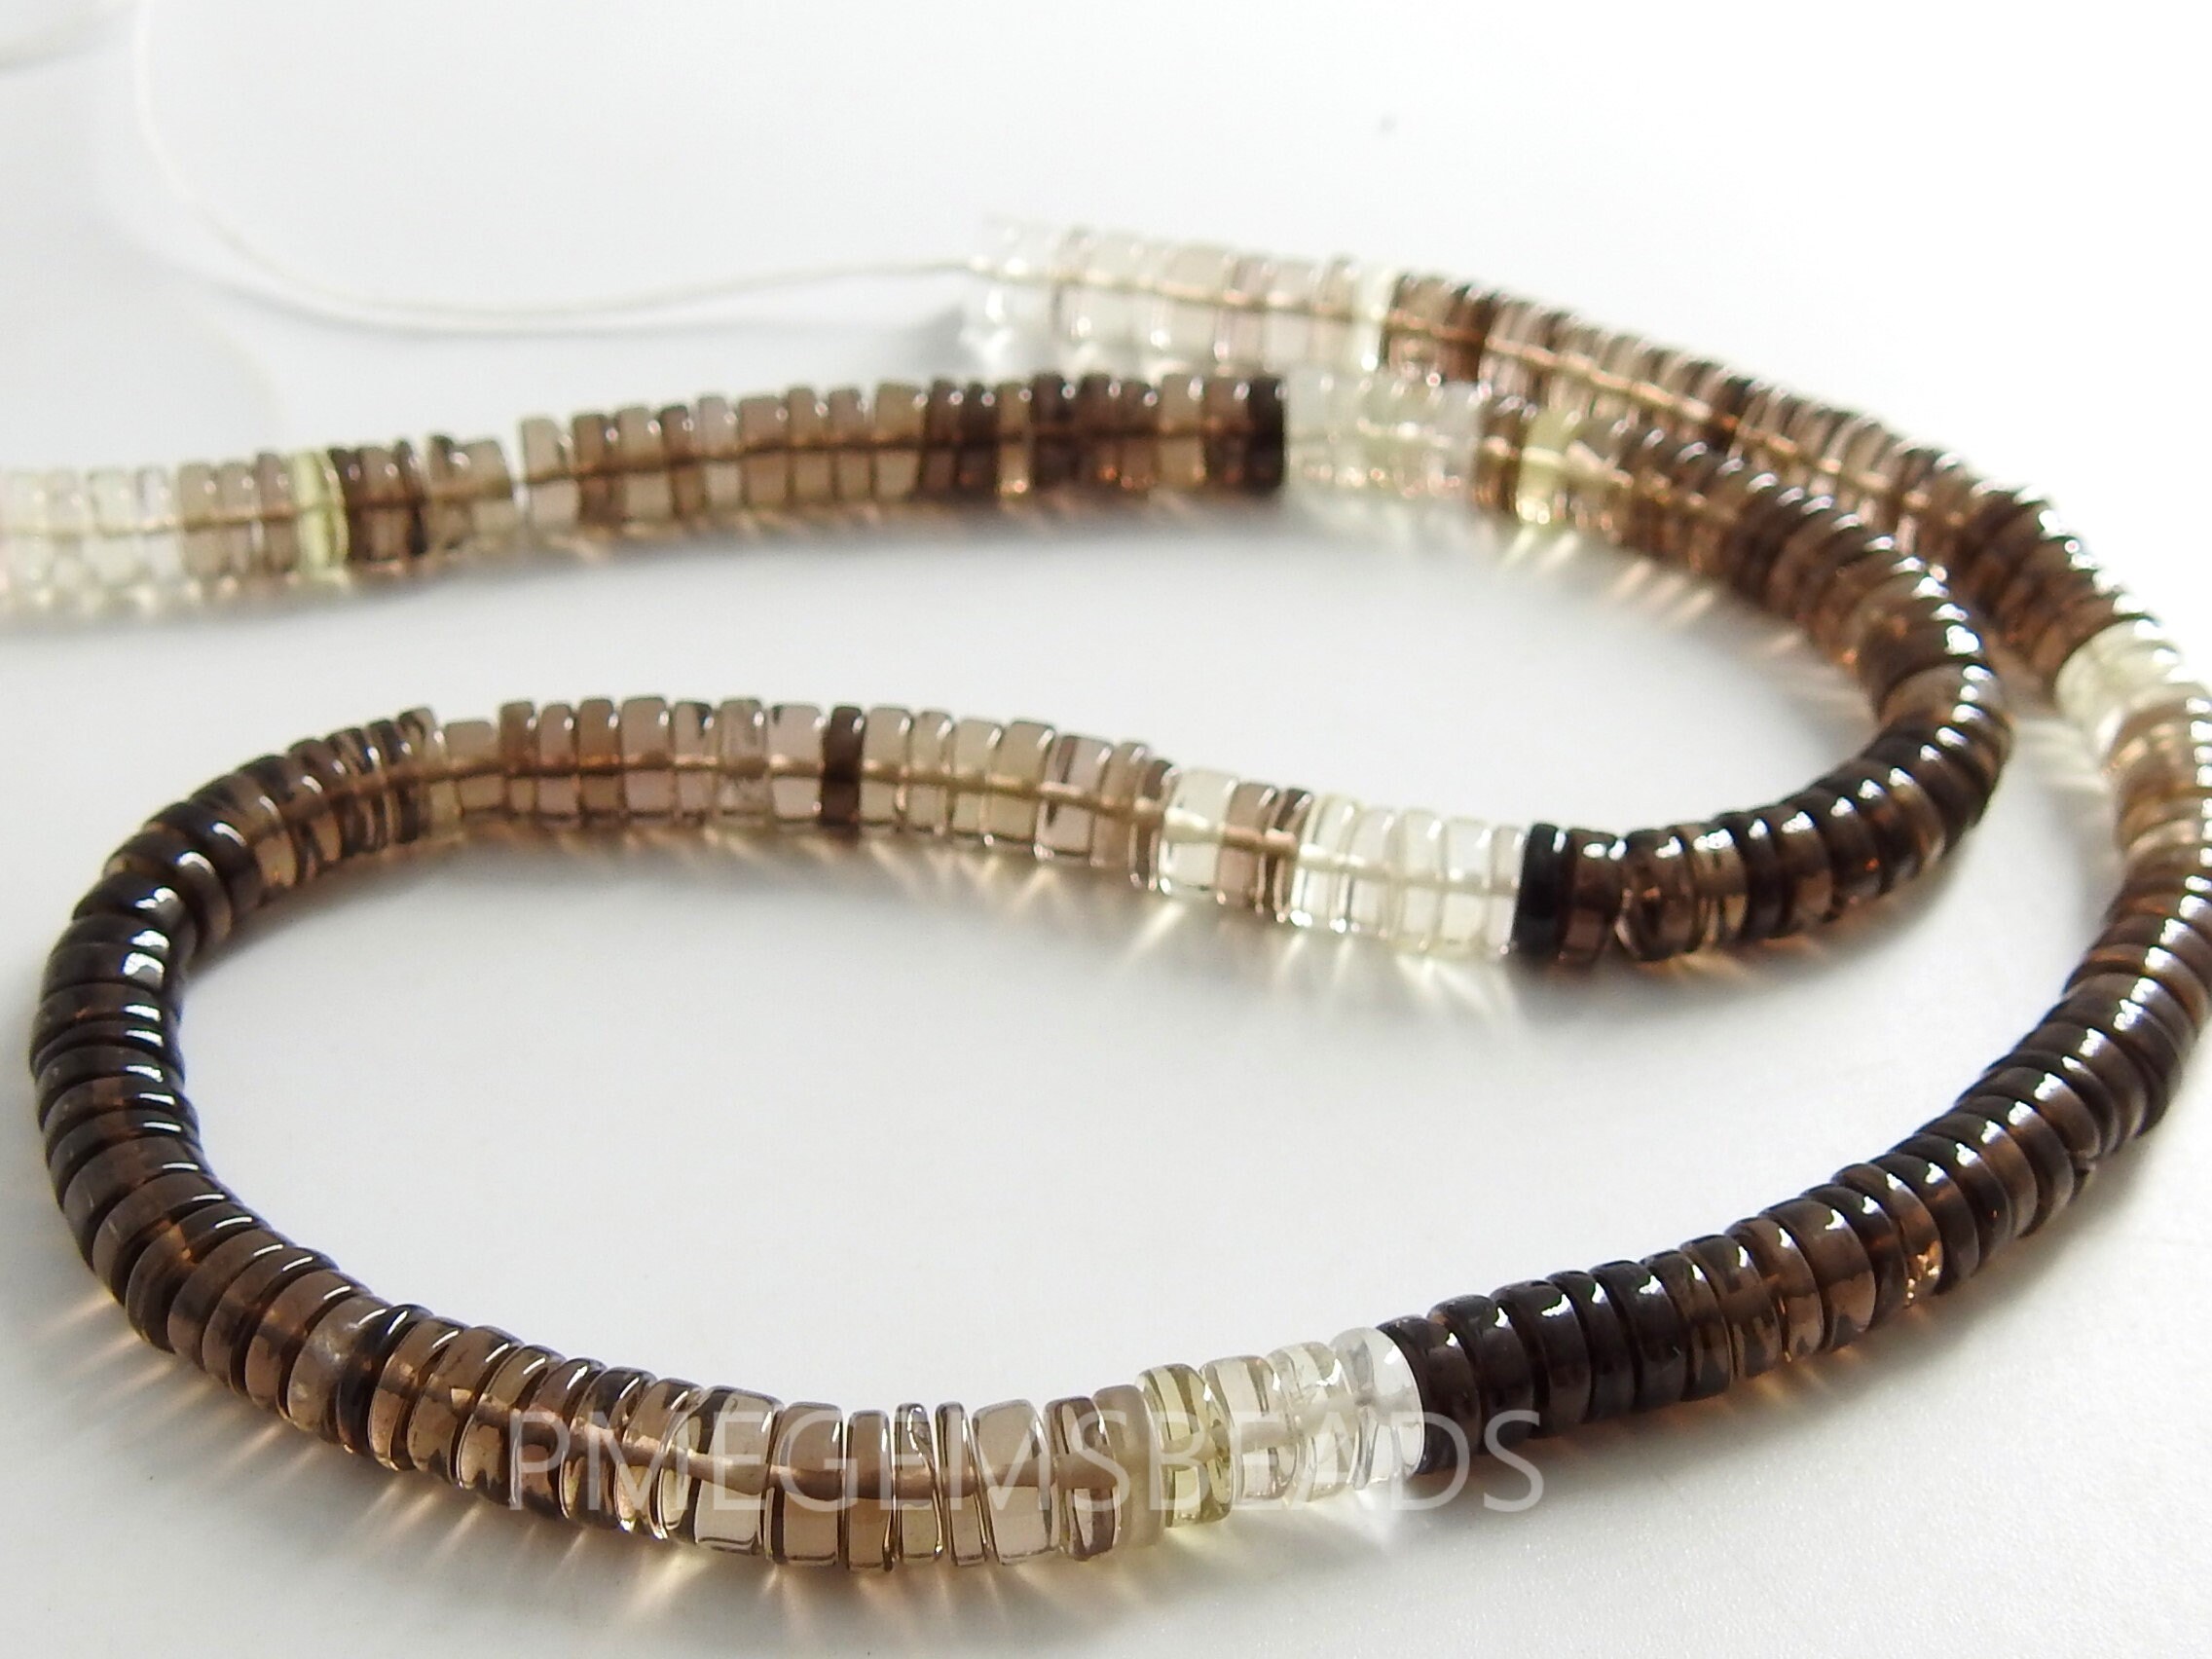 Smoky Quartz Smooth Tyres,Coin,Button Shape Bead,Multi Shaded,Loose Stone,Handmade,For Jewelry Makers 16Inch Strand 100%Natural (Pme)T2 | Save 33% - Rajasthan Living 14